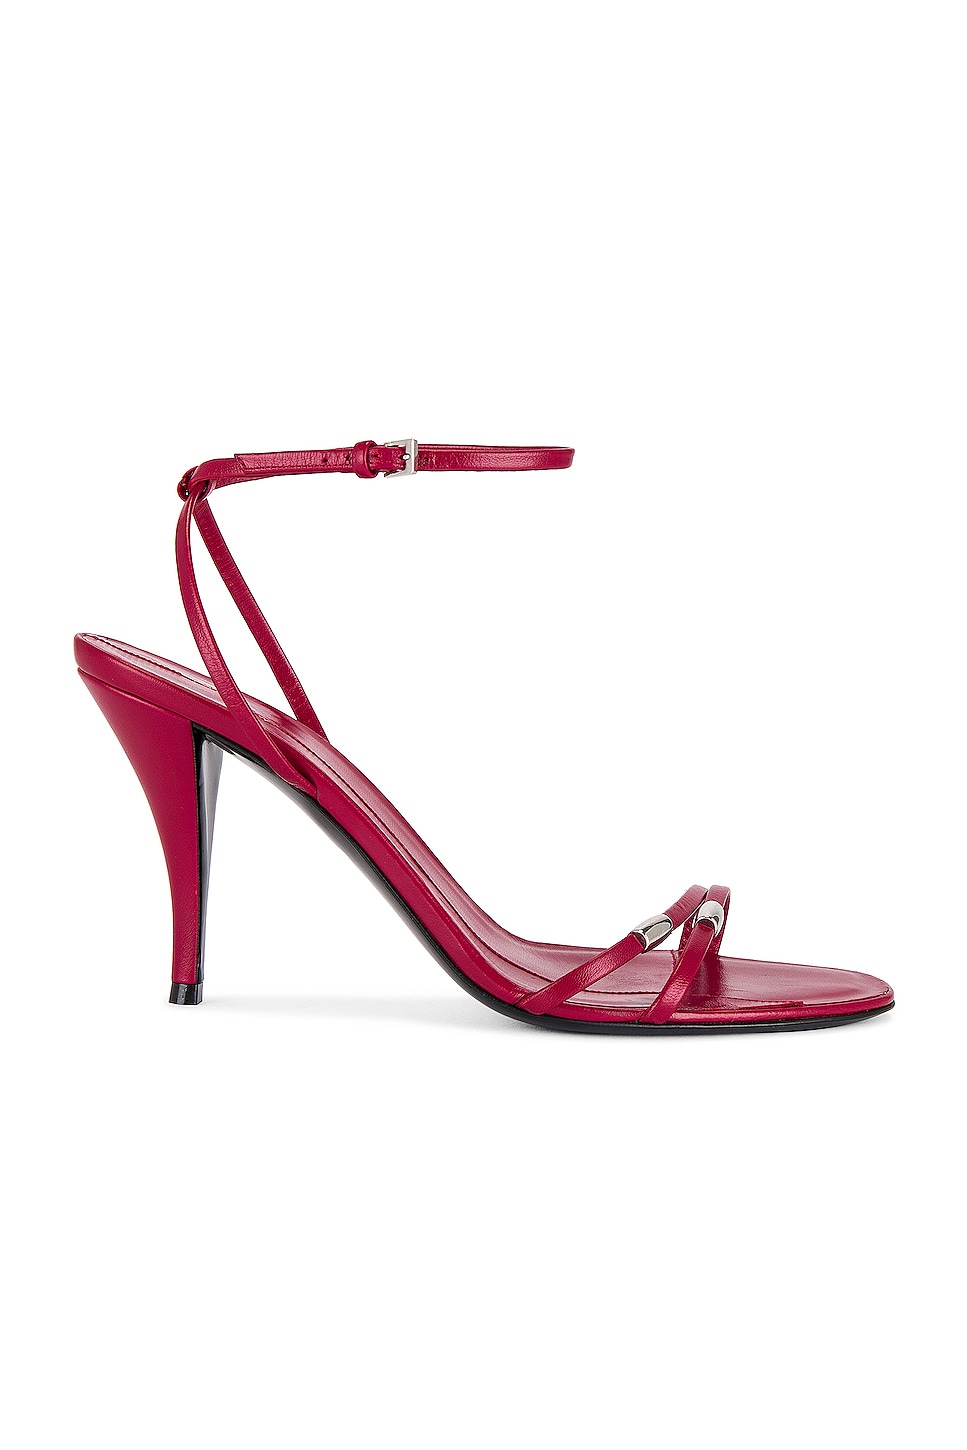 Image 1 of The Row Cleo Bijoux Sandal in Ribes & Silver